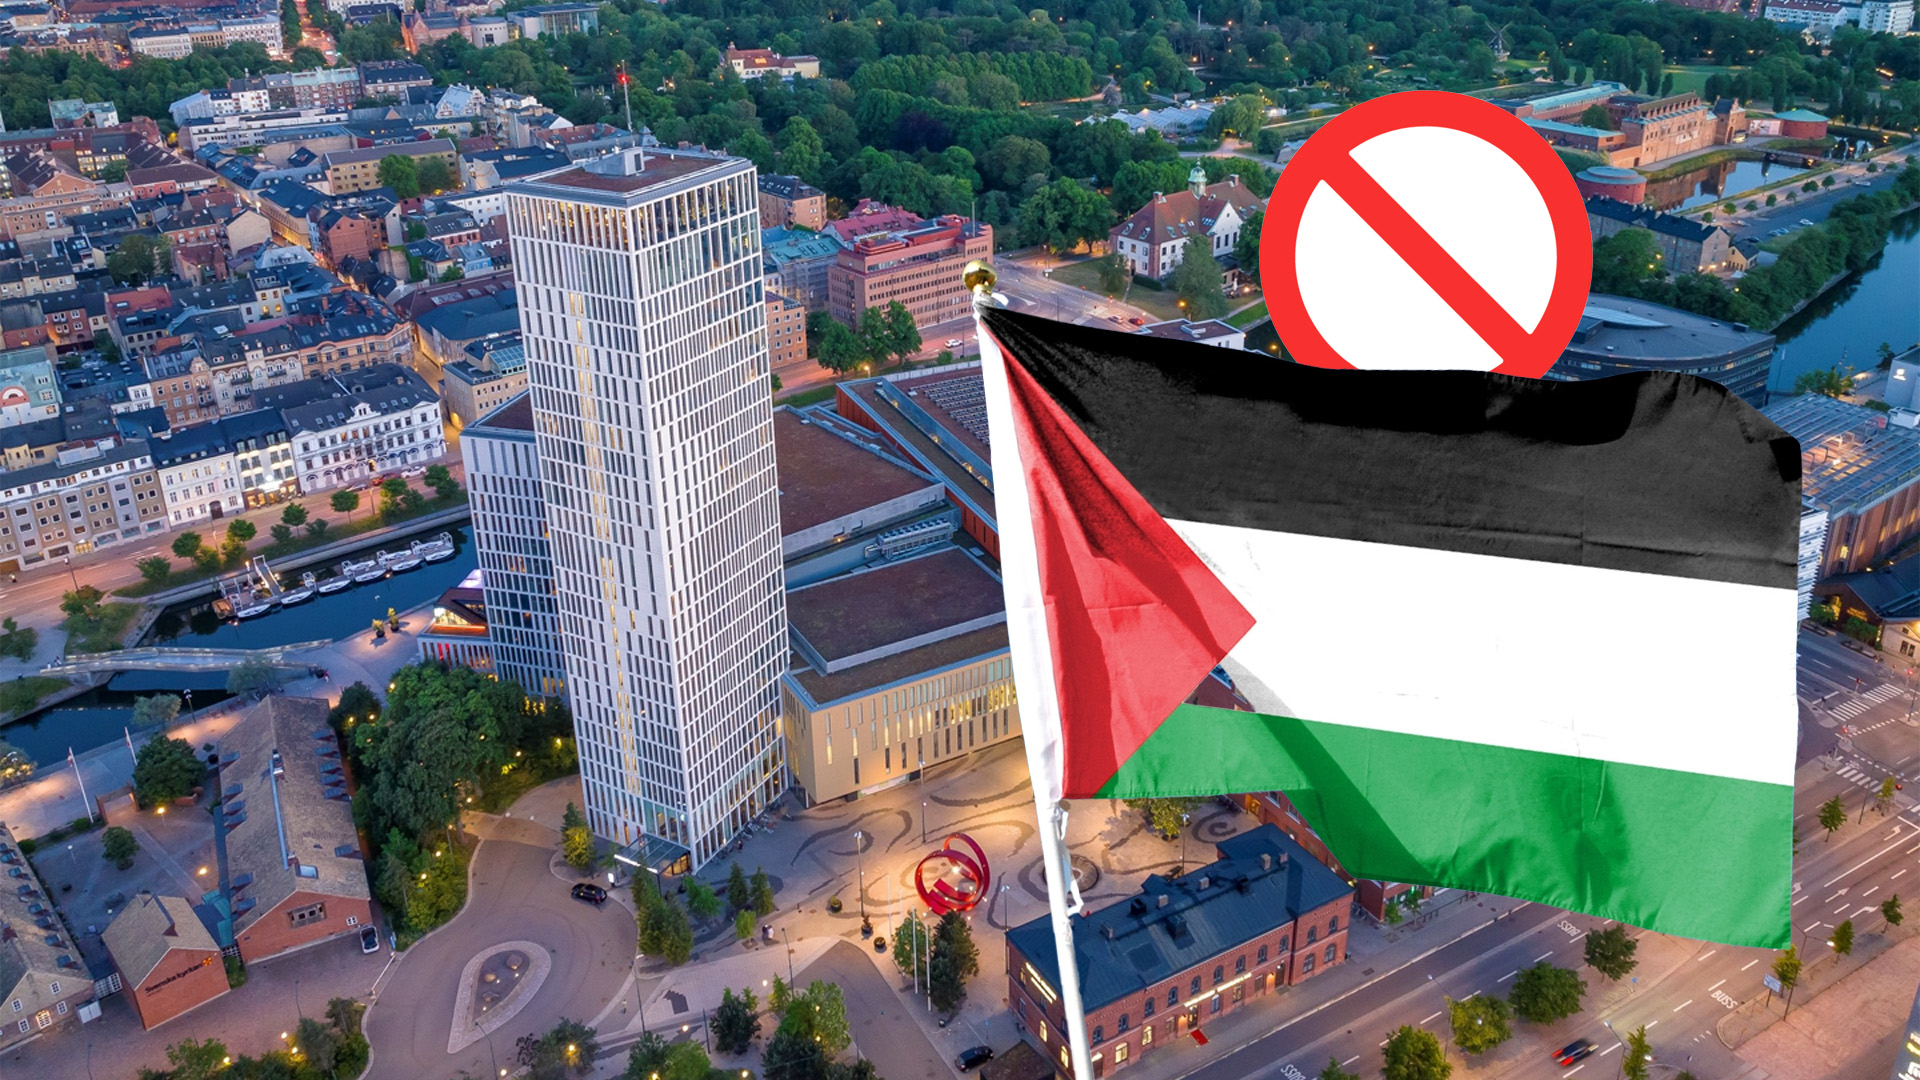 Eurovision Organiser Reserves Right to Remove Palestinian Flags & Symbols